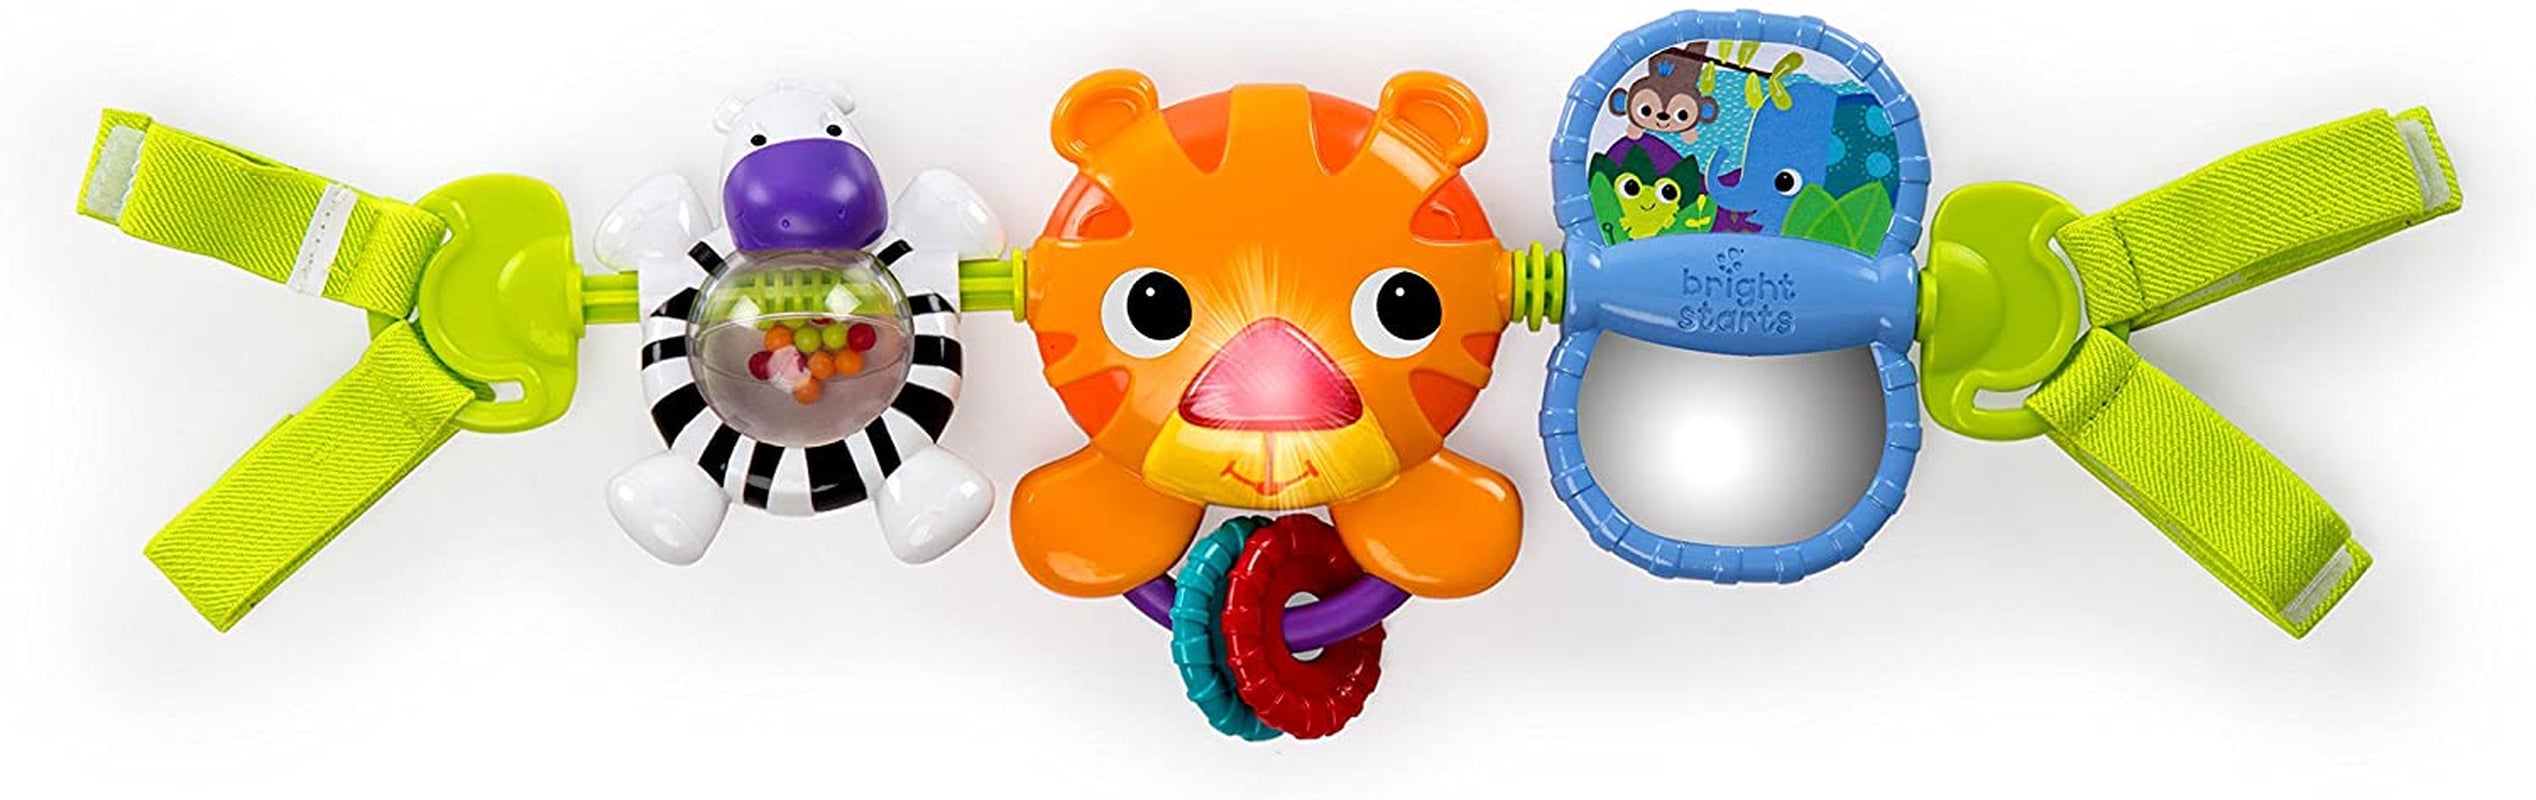 Bright Starts, Take Along Musical Carrier Activity Toy Bar, 4 Melodies, Ball Rattle, Self Discovery Mirror, Bead Chaser, Jungle Themed Baby Toys, Clip on Pram & Pushchair, Ages Newborn +, Multi-Colour